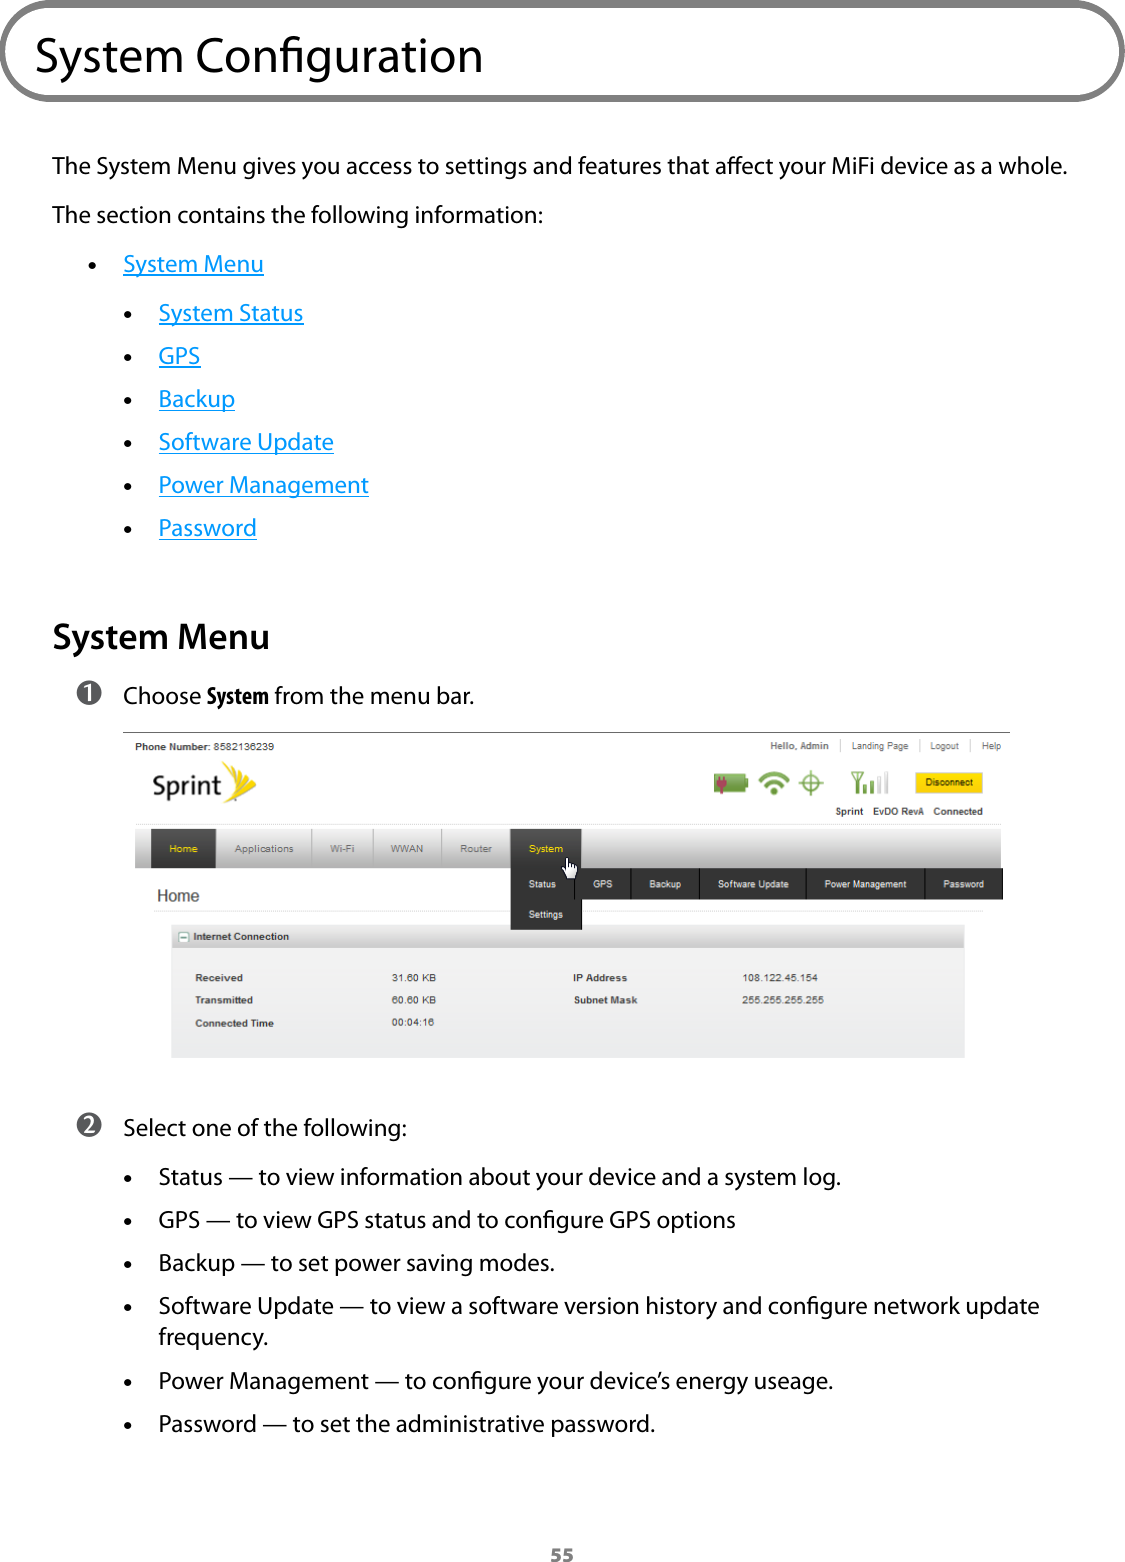 55System CongurationThe System Menu gives you access to settings and features that aect your MiFi device as a whole.The section contains the following information: •System Menu •System Status •GPS •Backup •Software Update •Power Management •PasswordSystem Menu ➊ Choose System from the menu bar. ➋ Select one of the following: •Status — to view information about your device and a system log. •GPS — to view GPS status and to congure GPS options •Backup — to set power saving modes. •Software Update — to view a software version history and congure network update frequency. •Power Management — to congure your device’s energy useage. •Password — to set the administrative password.